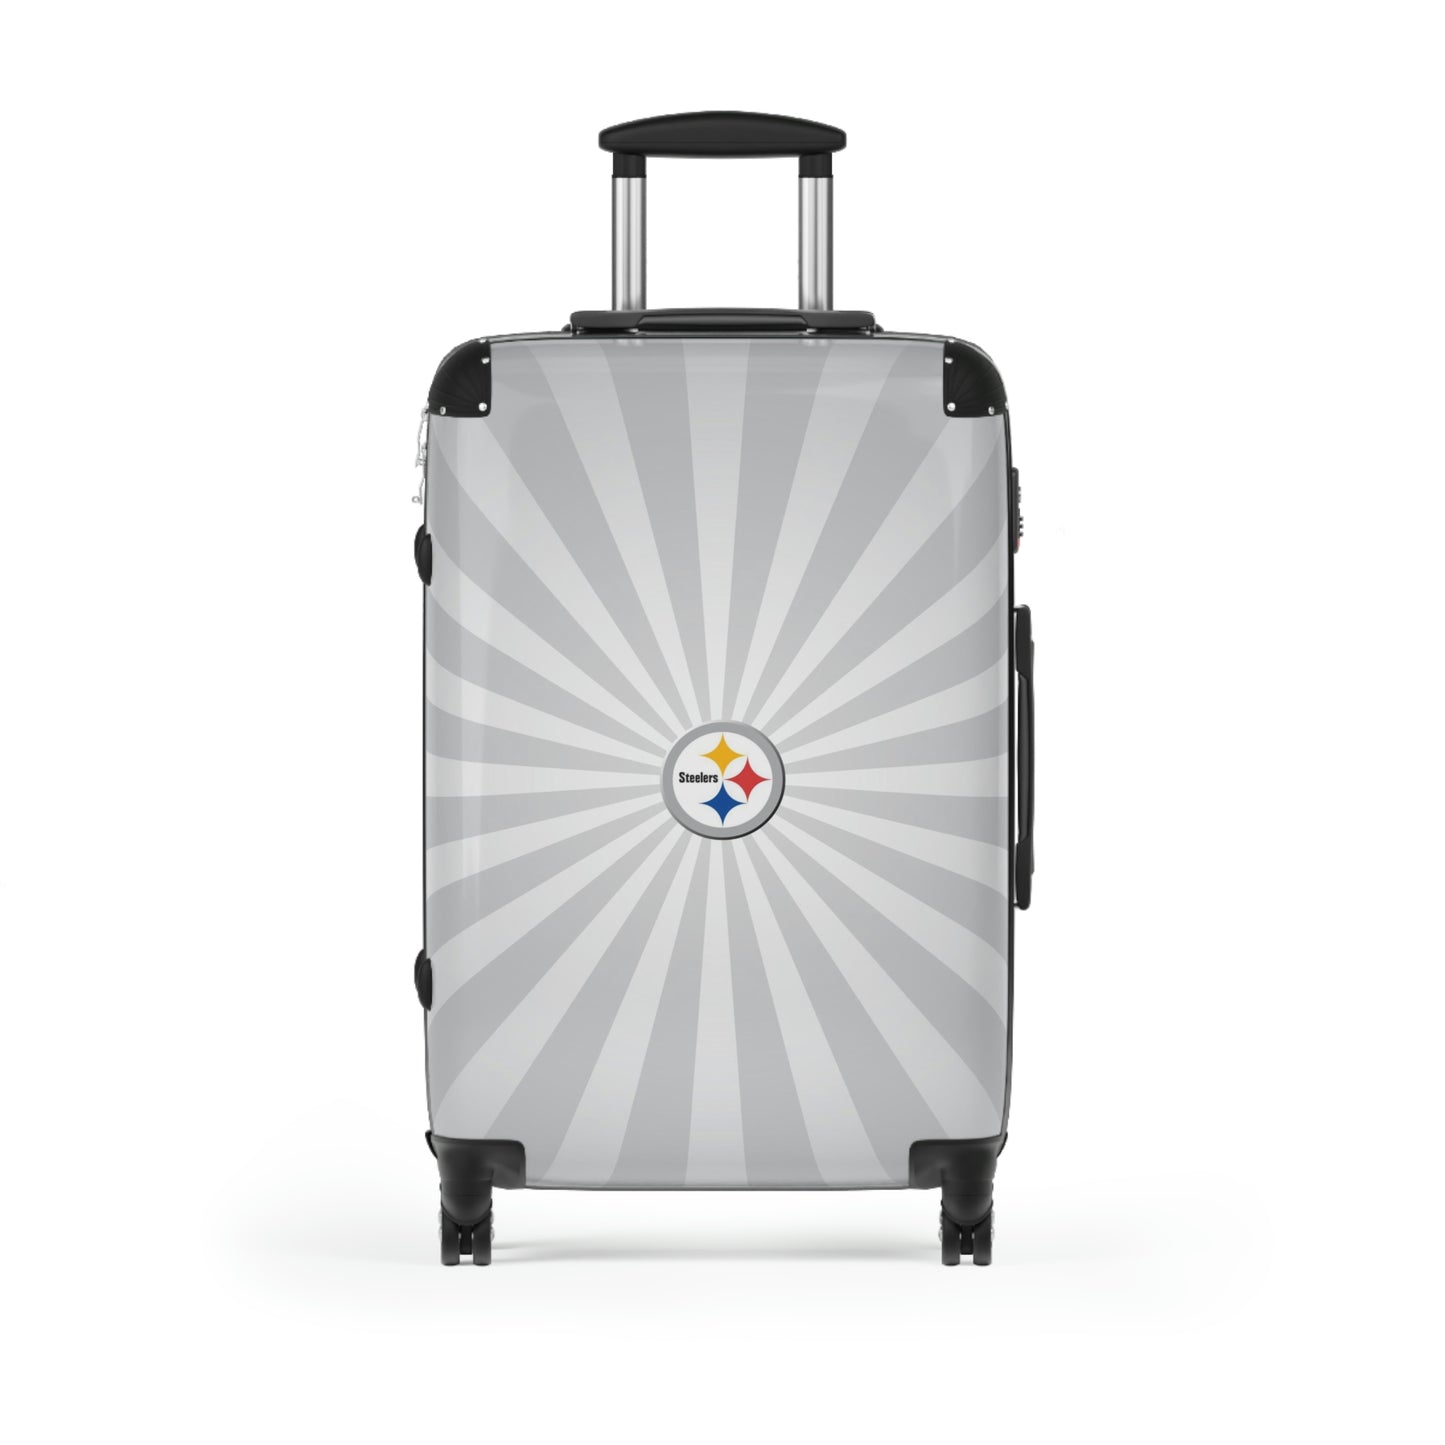 Geotrott Pittsburgh Steelers National Football League NFL Team Logo Cabin Suitcase Rolling Luggage Checking Bag